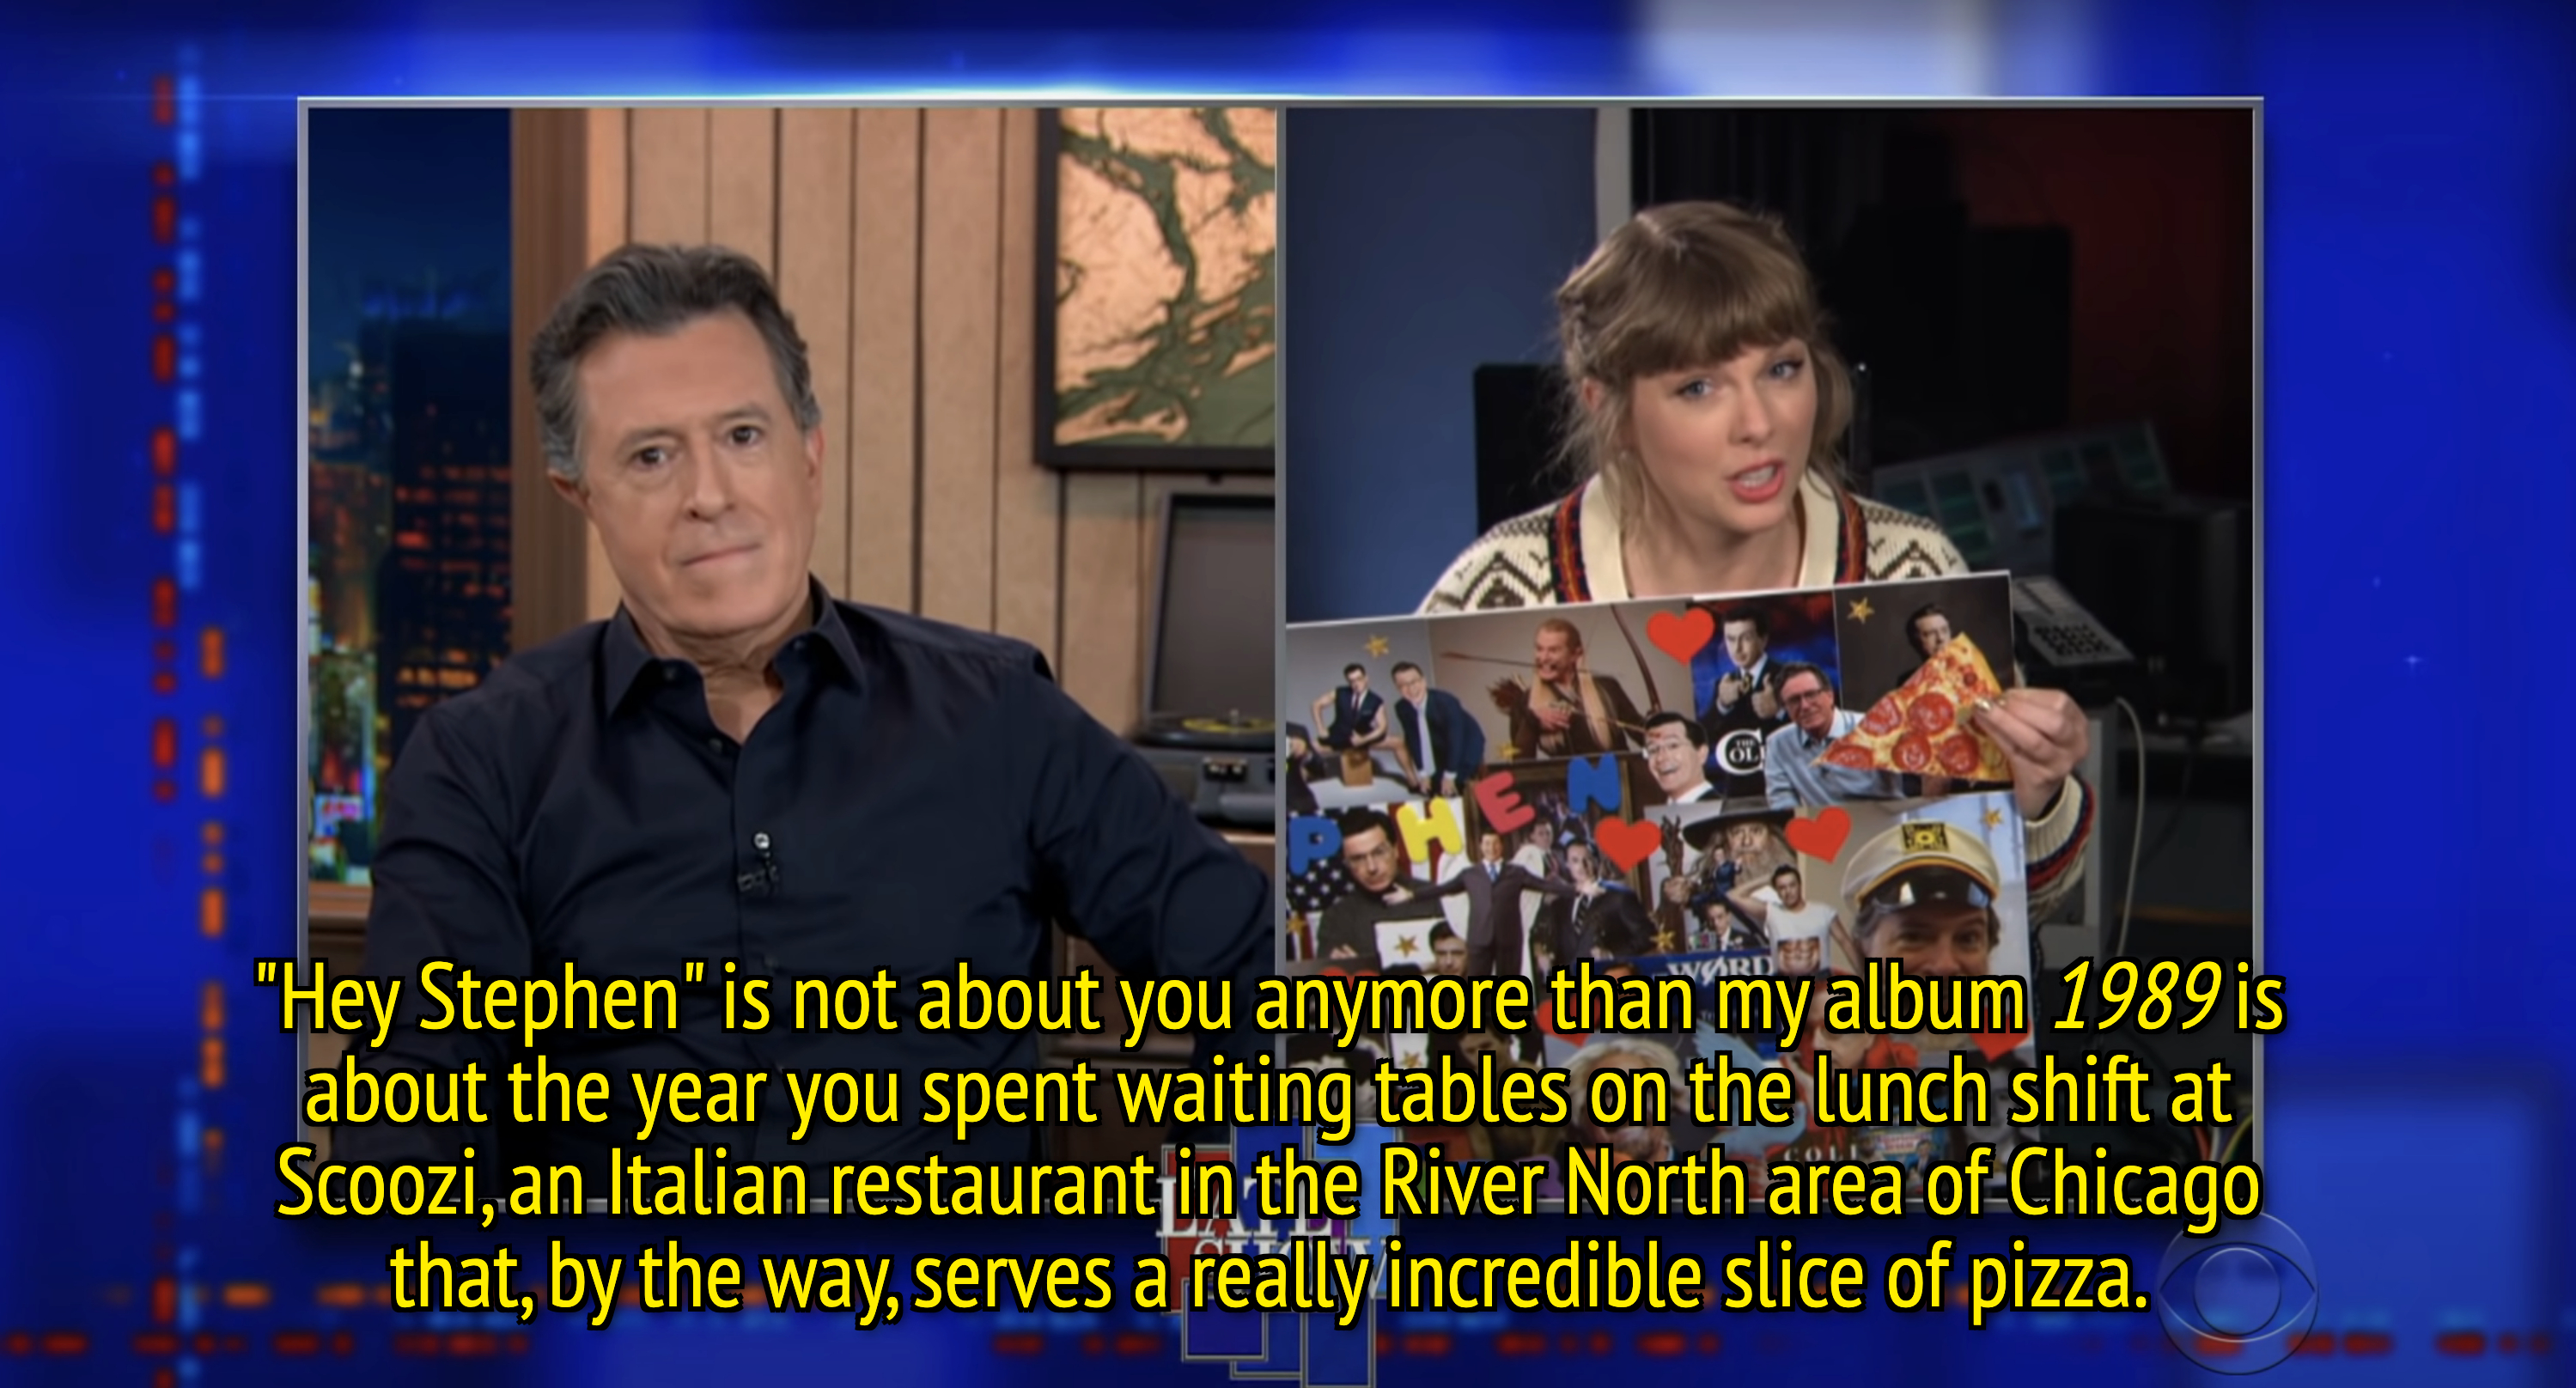 Talk show host interviewing Taylor Swift, who is holding up a mood board with various images and texts